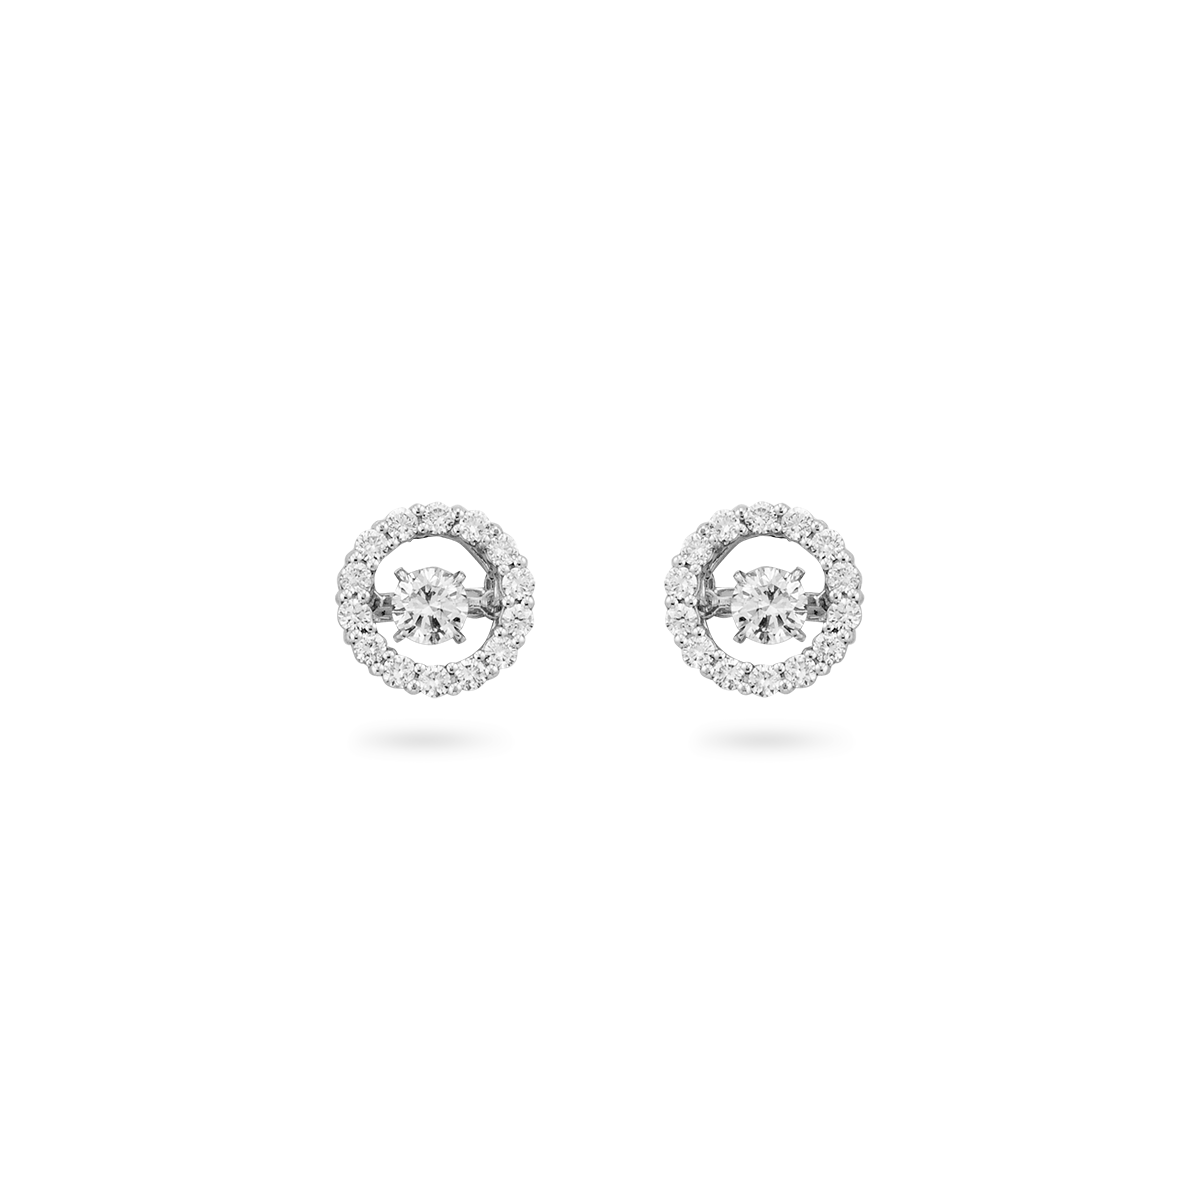 LOOK OF SOLITAIRE EAR STUDS